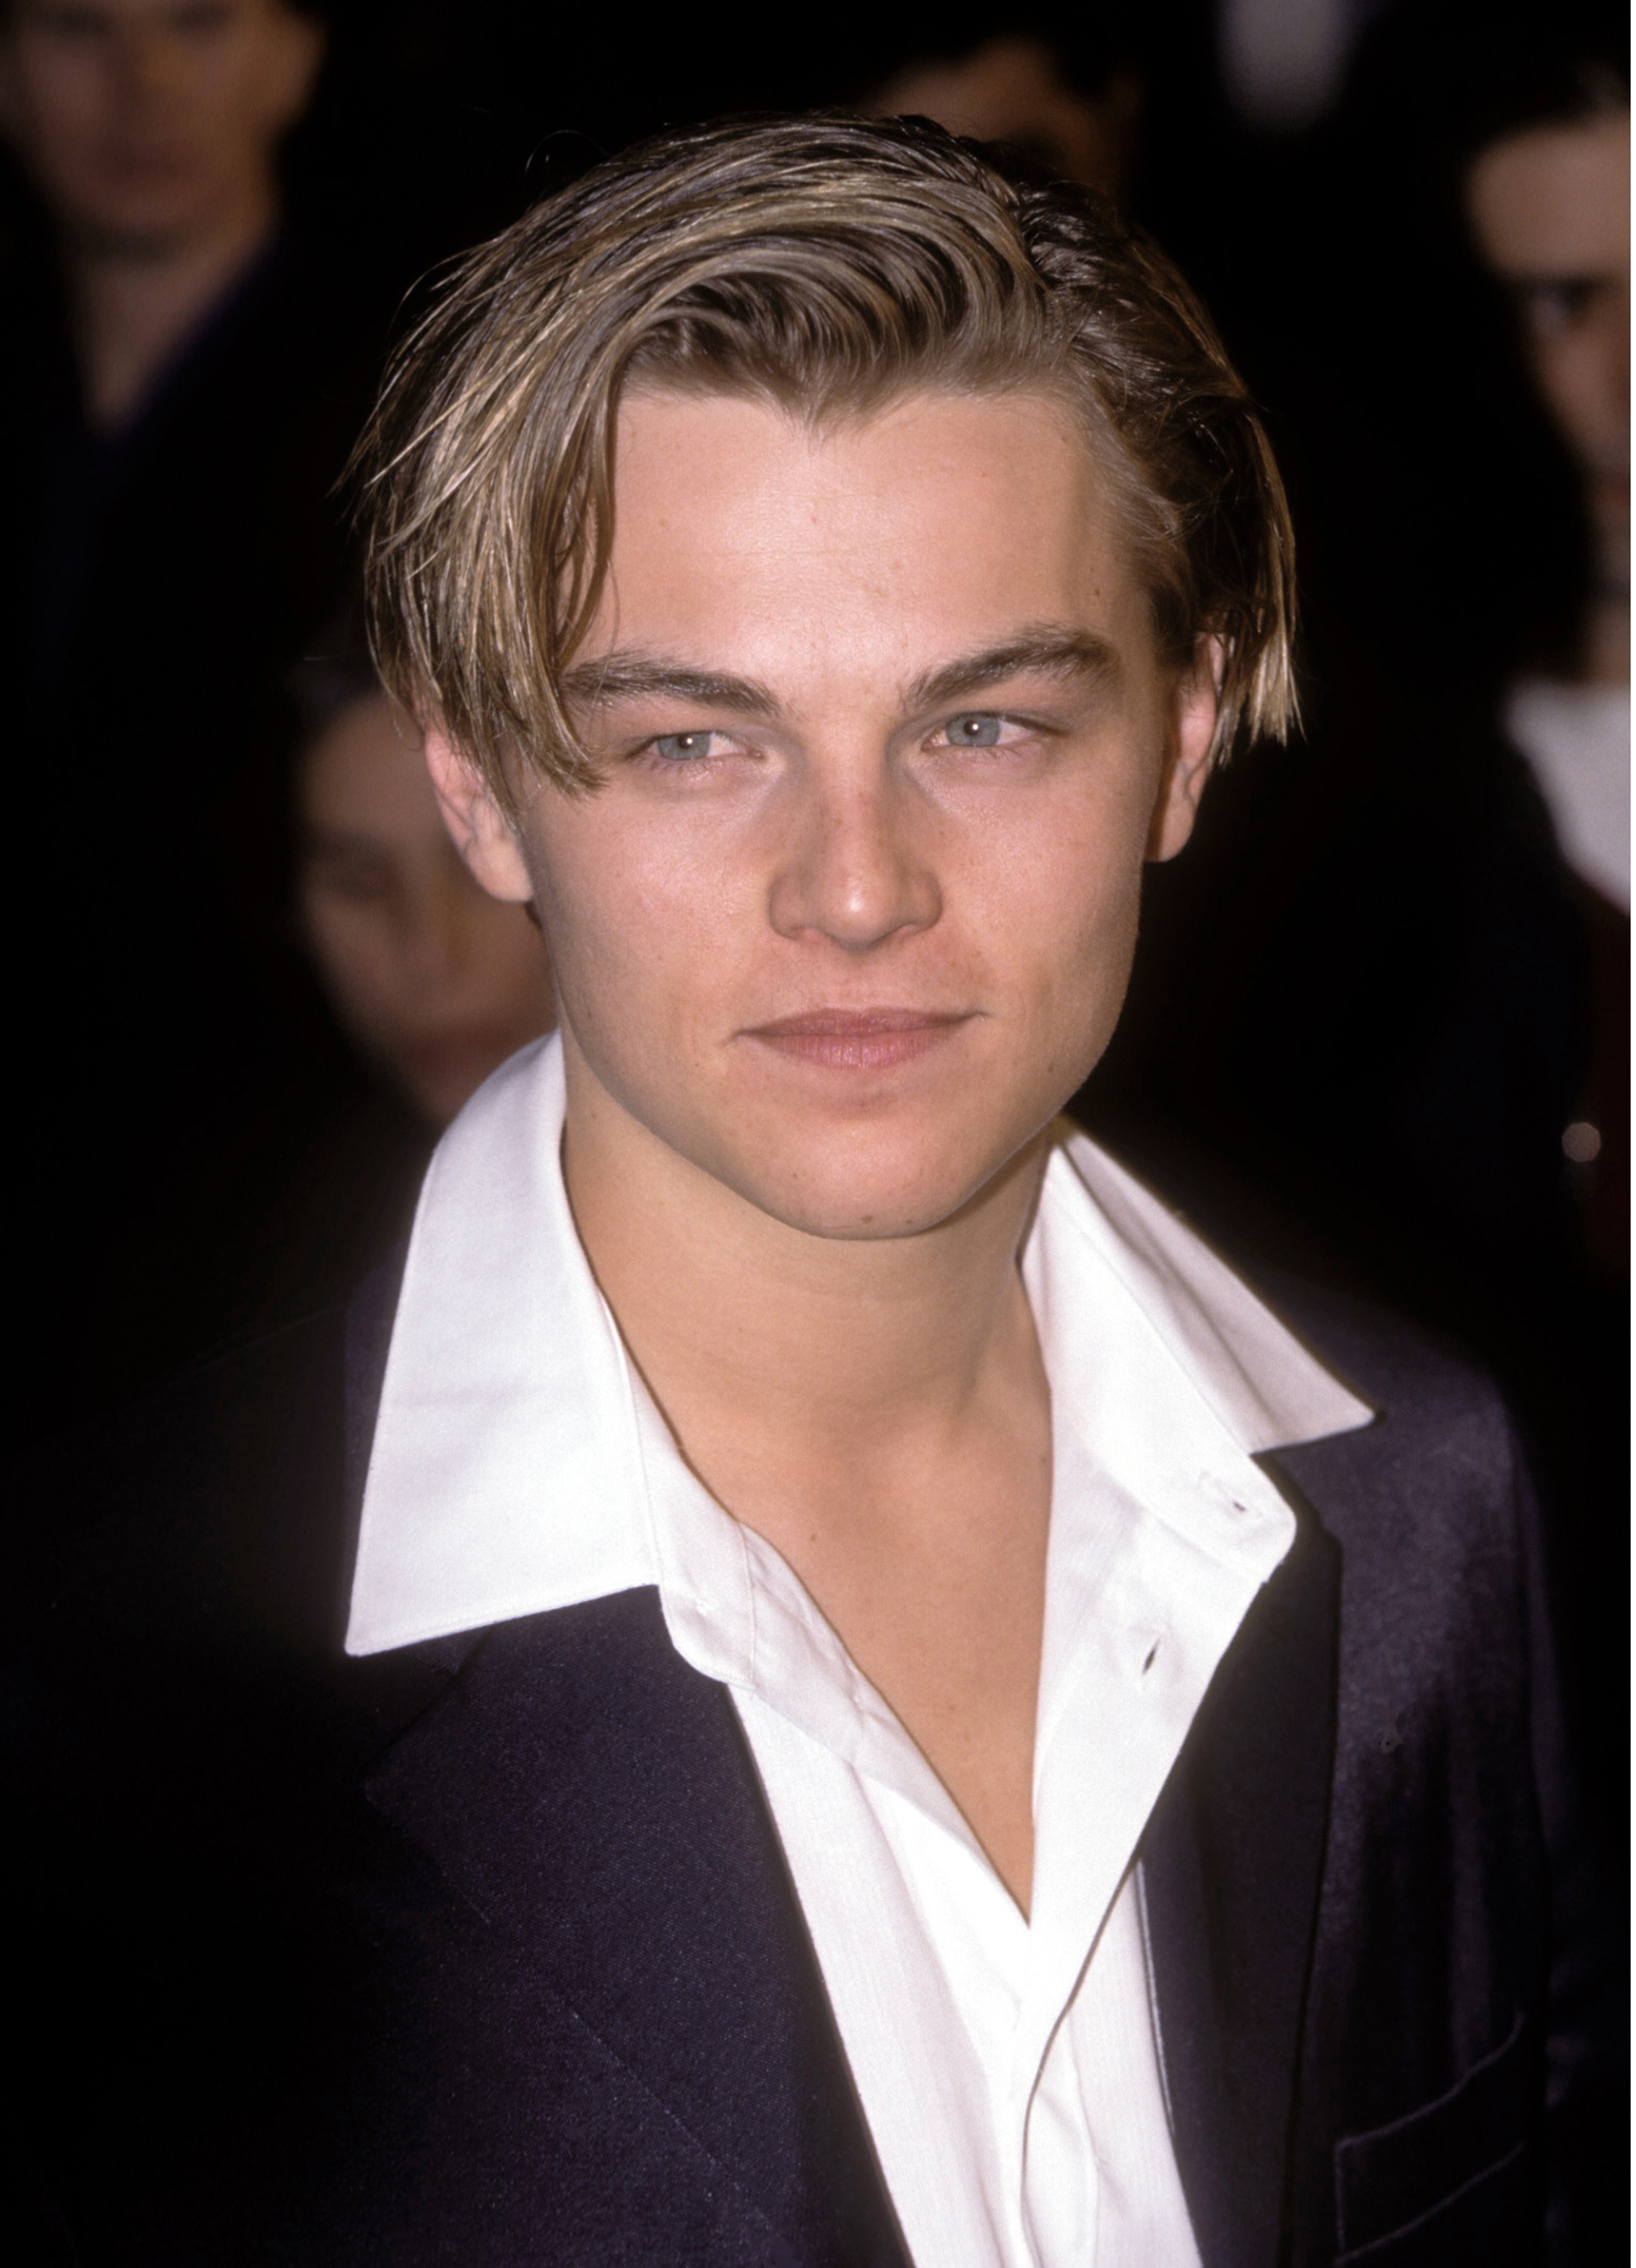 Leonardo DiCaprio Nearly Lost Out On “Titanic” Because He Was “So Negative”